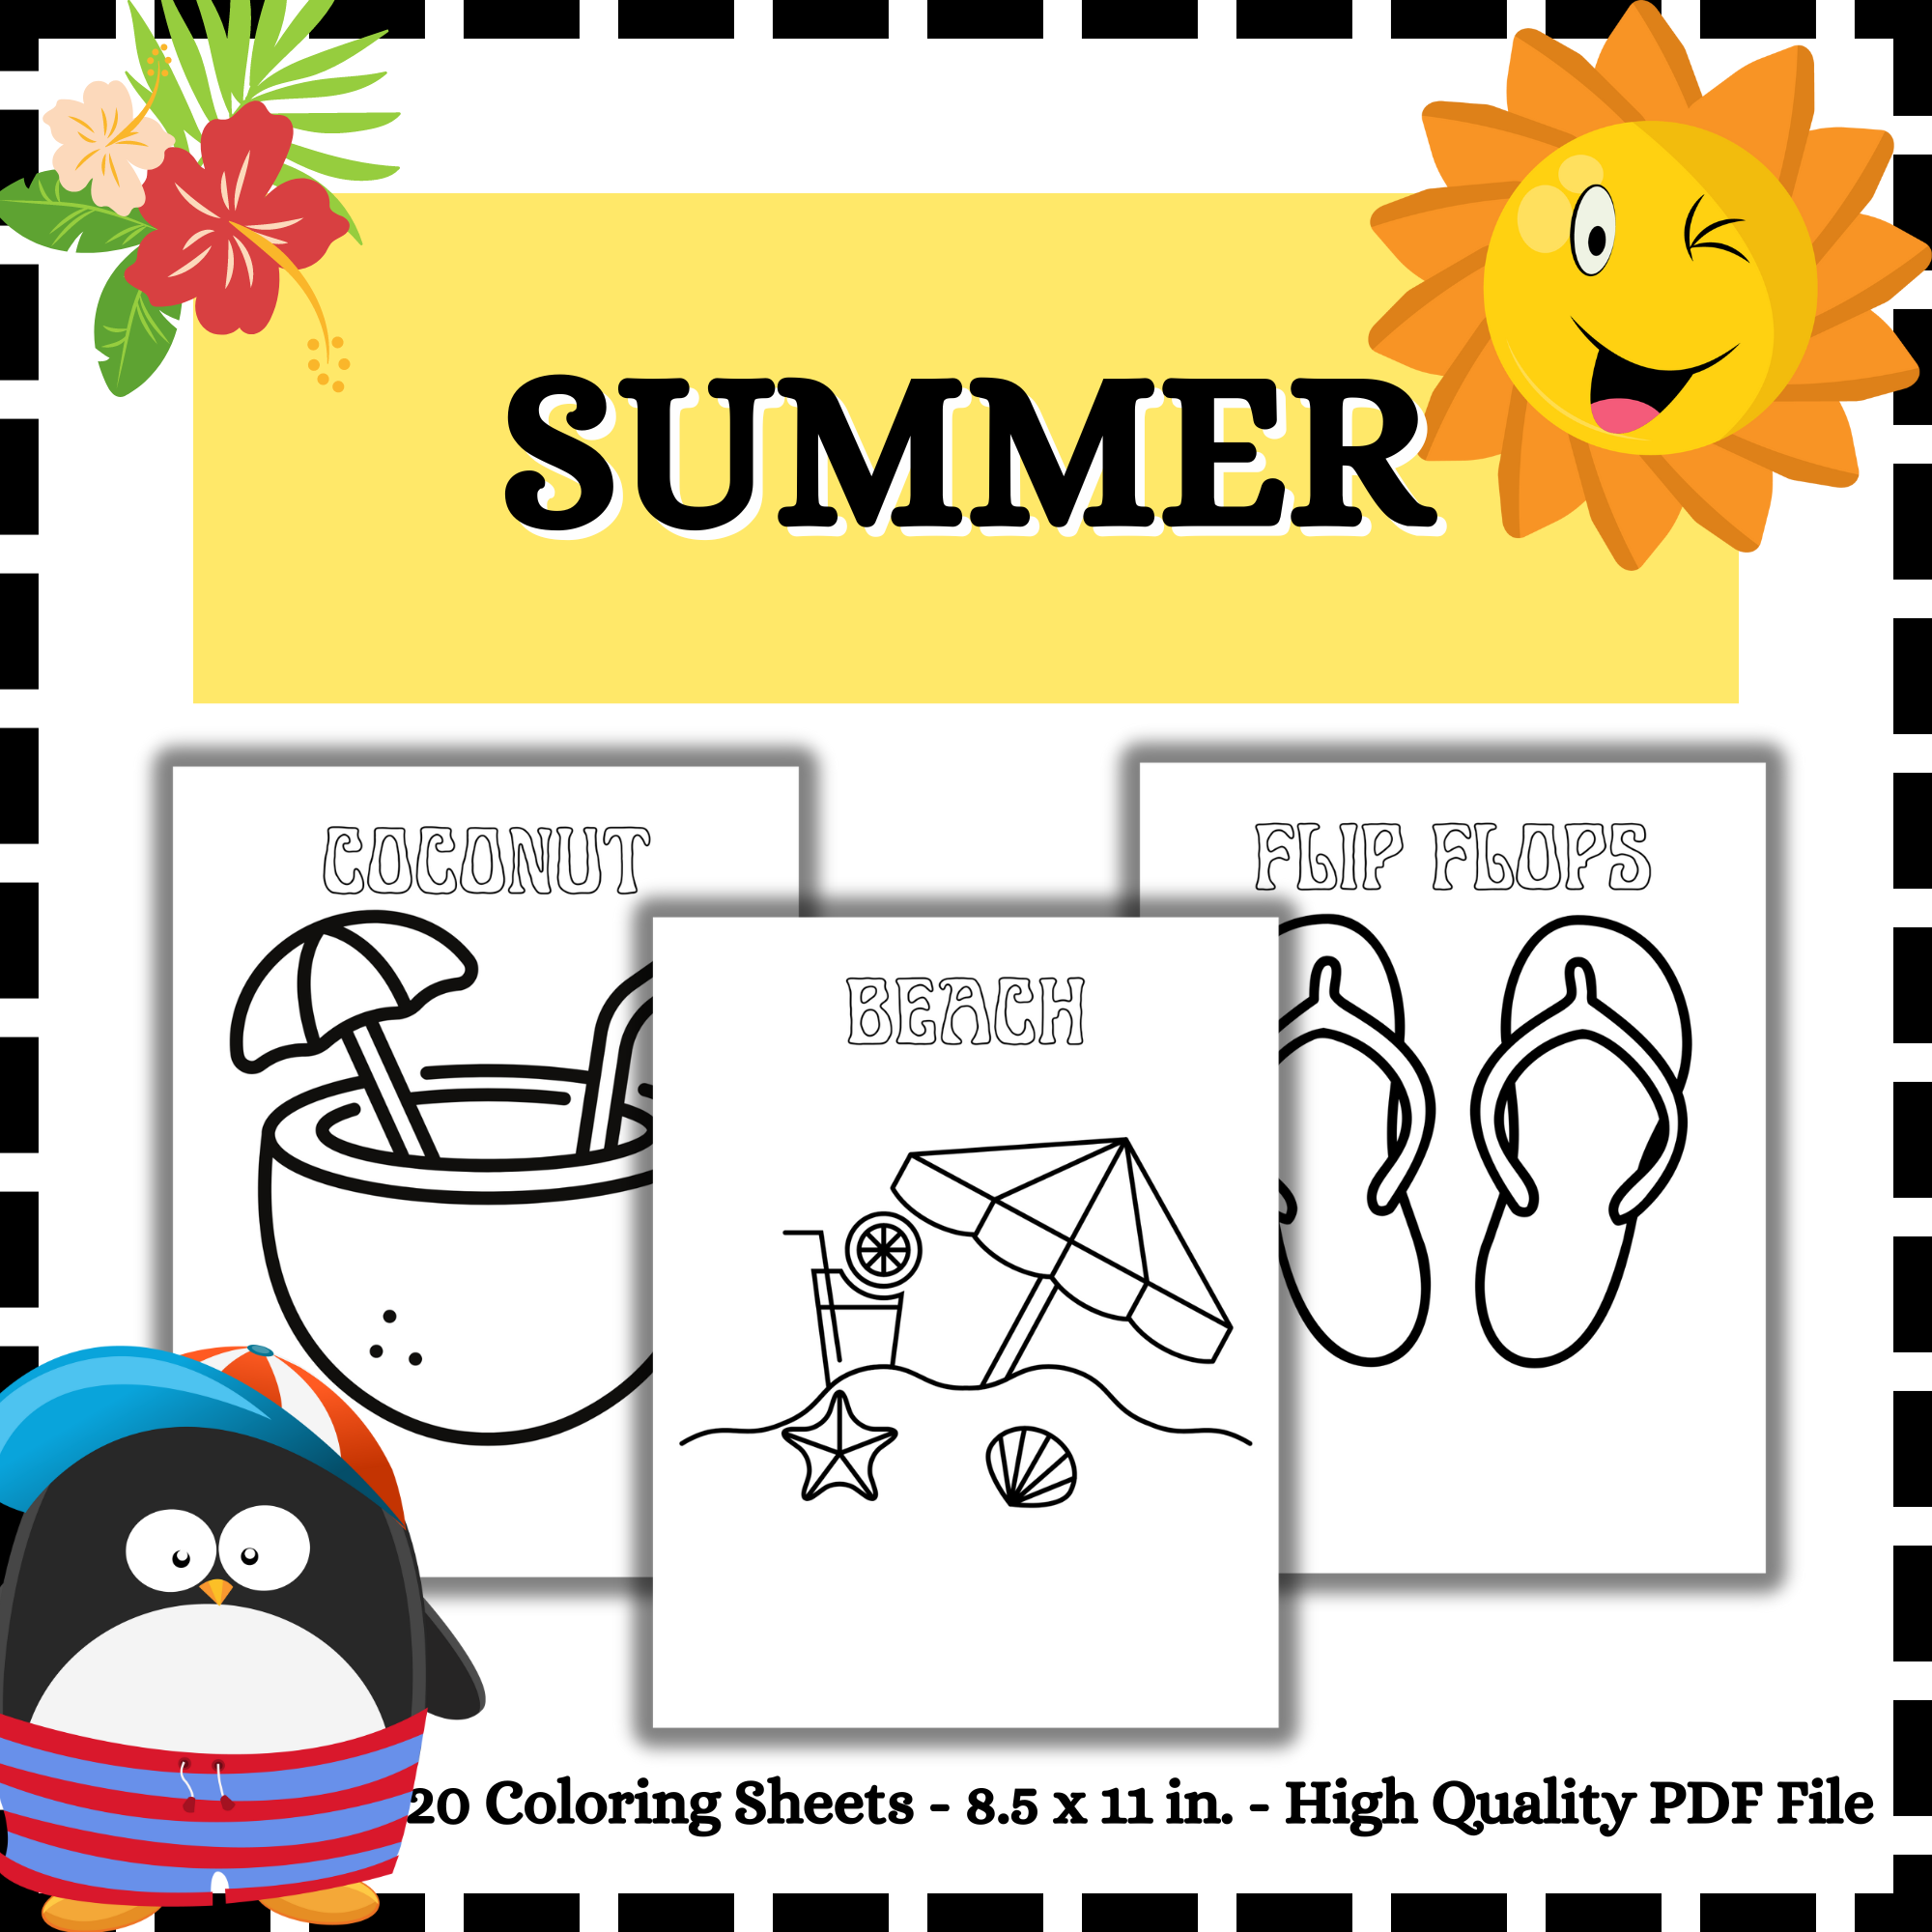 Summer coloring sheets summer coloring pages made by teachers